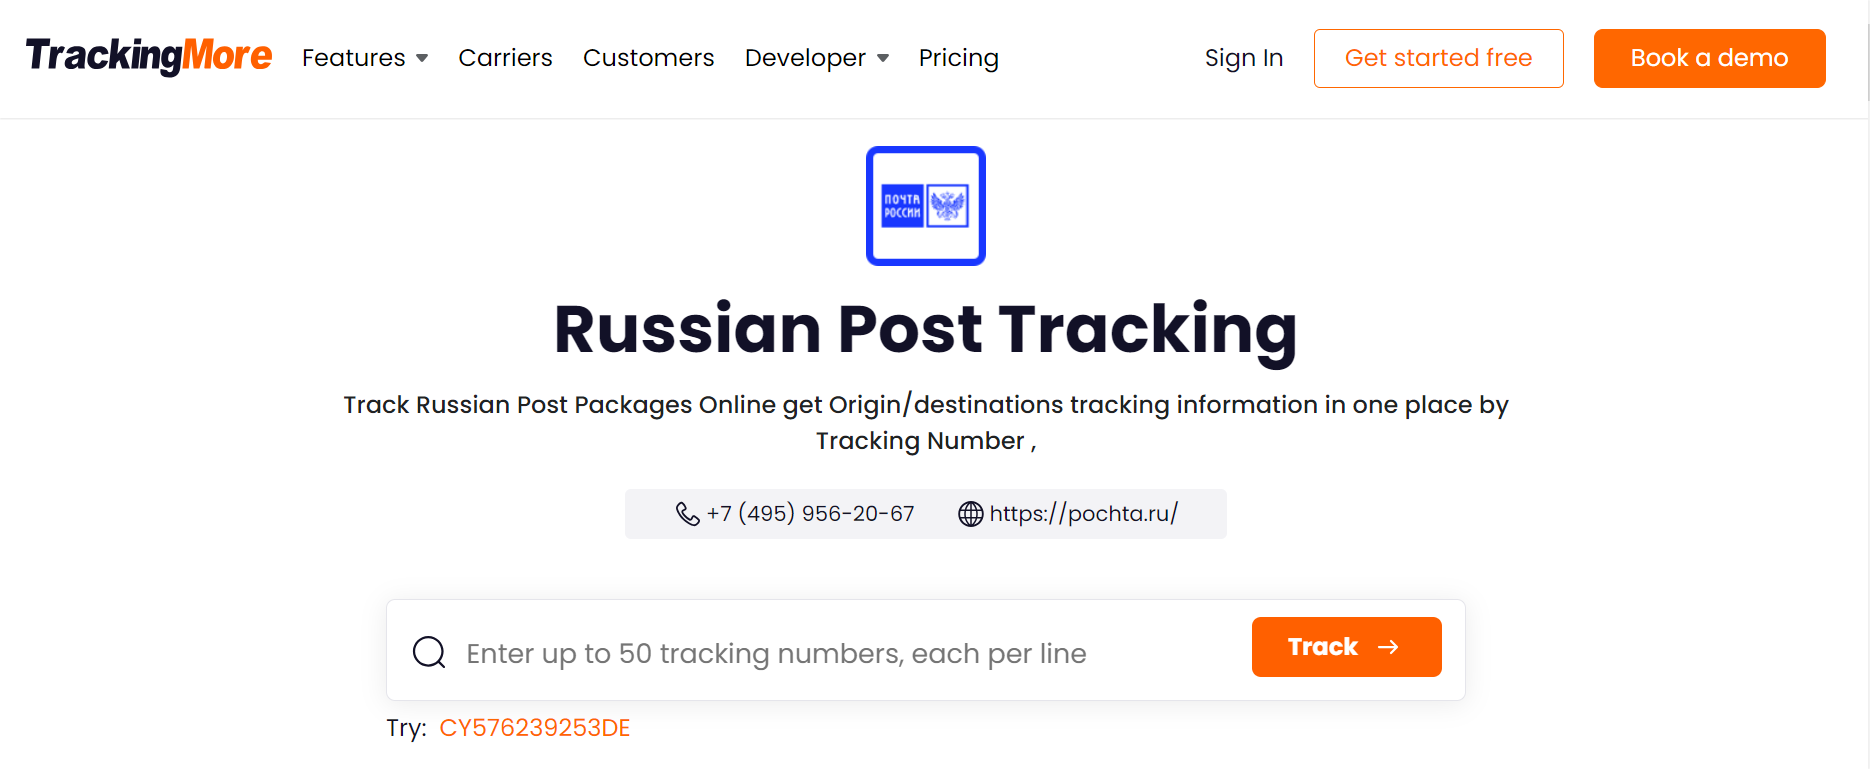 TrackingMore Russian Post tracking page